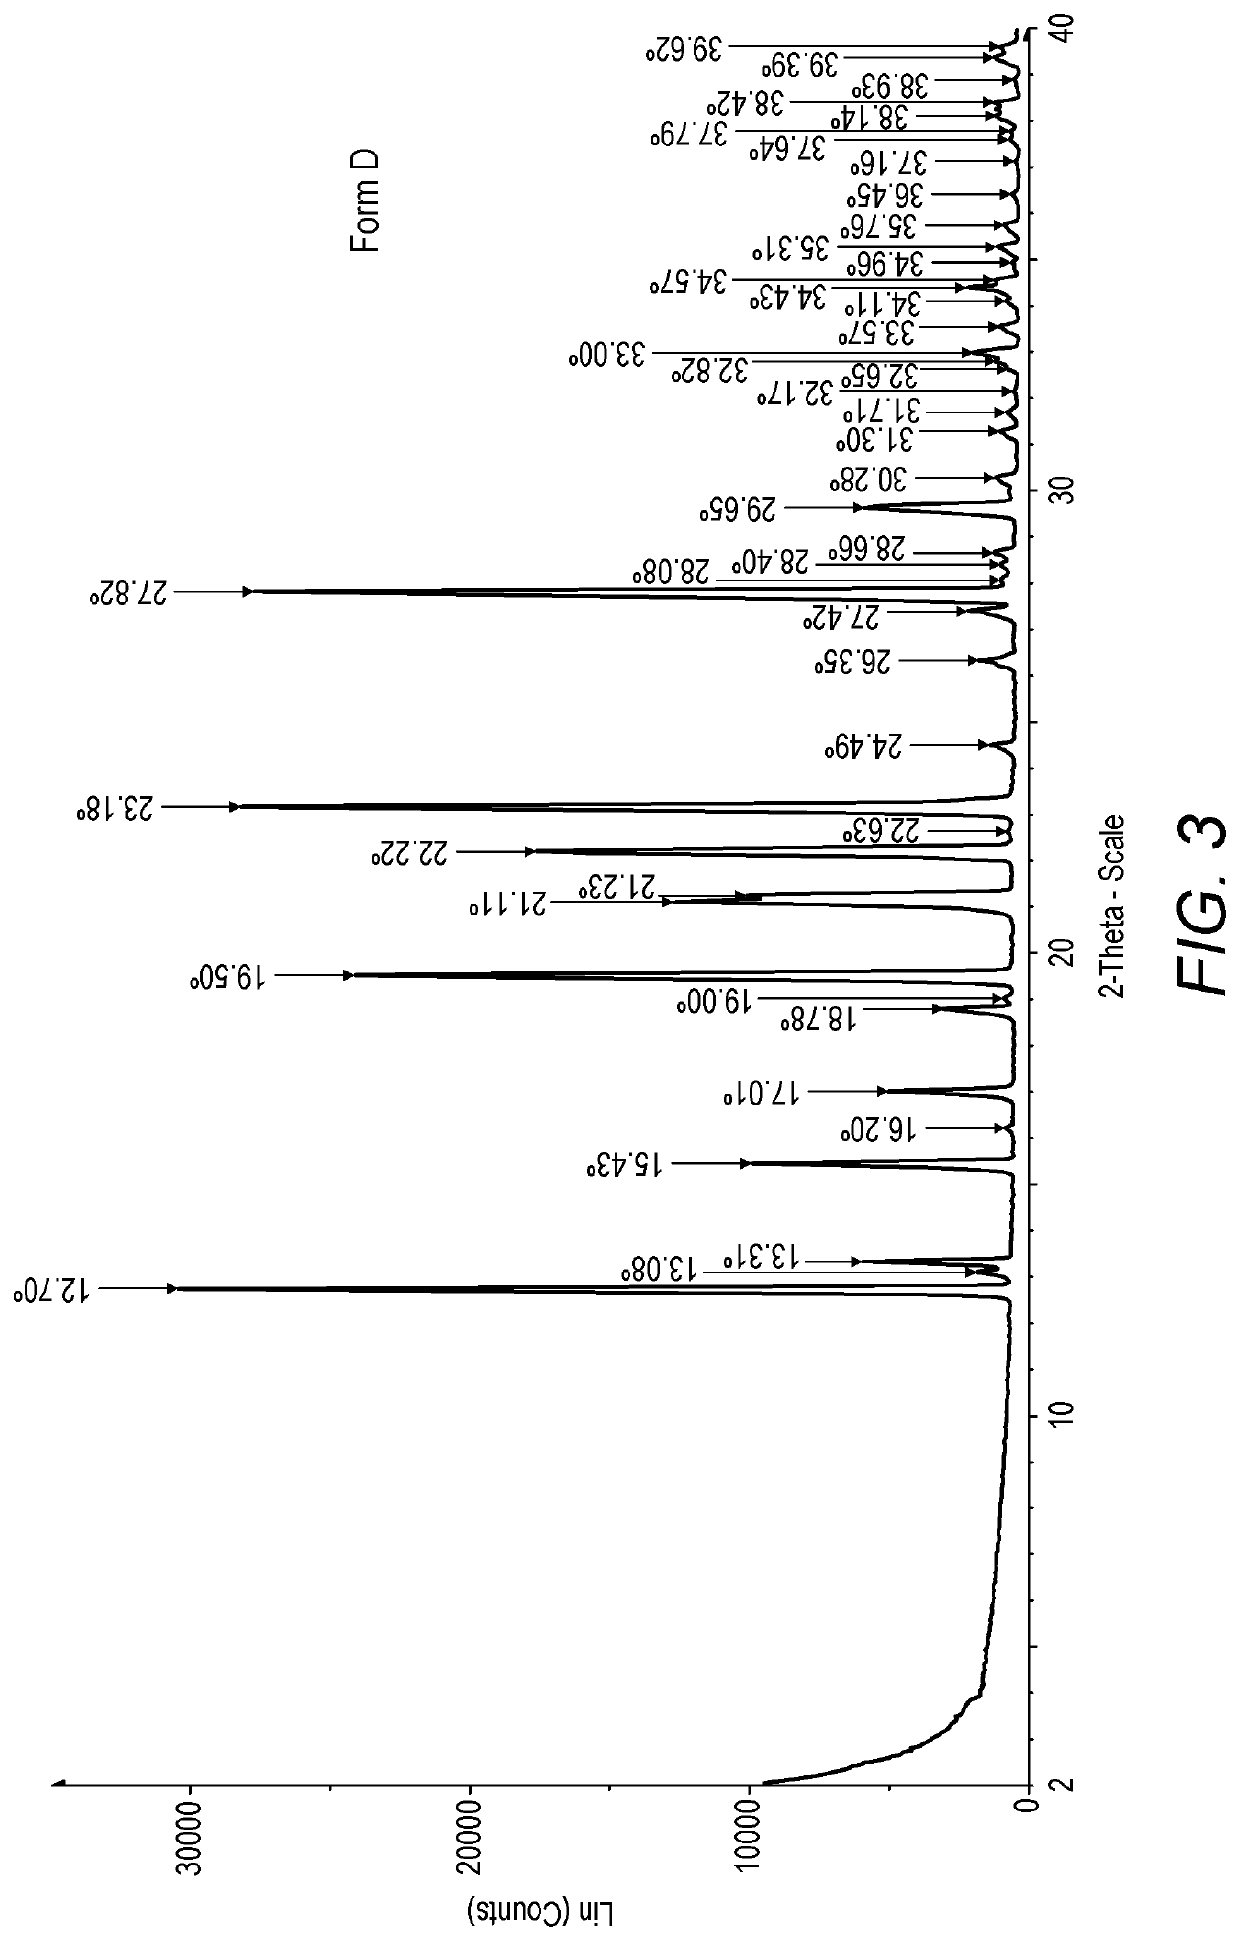 Process for the preparation of ridinilazole and crystalline forms thereof